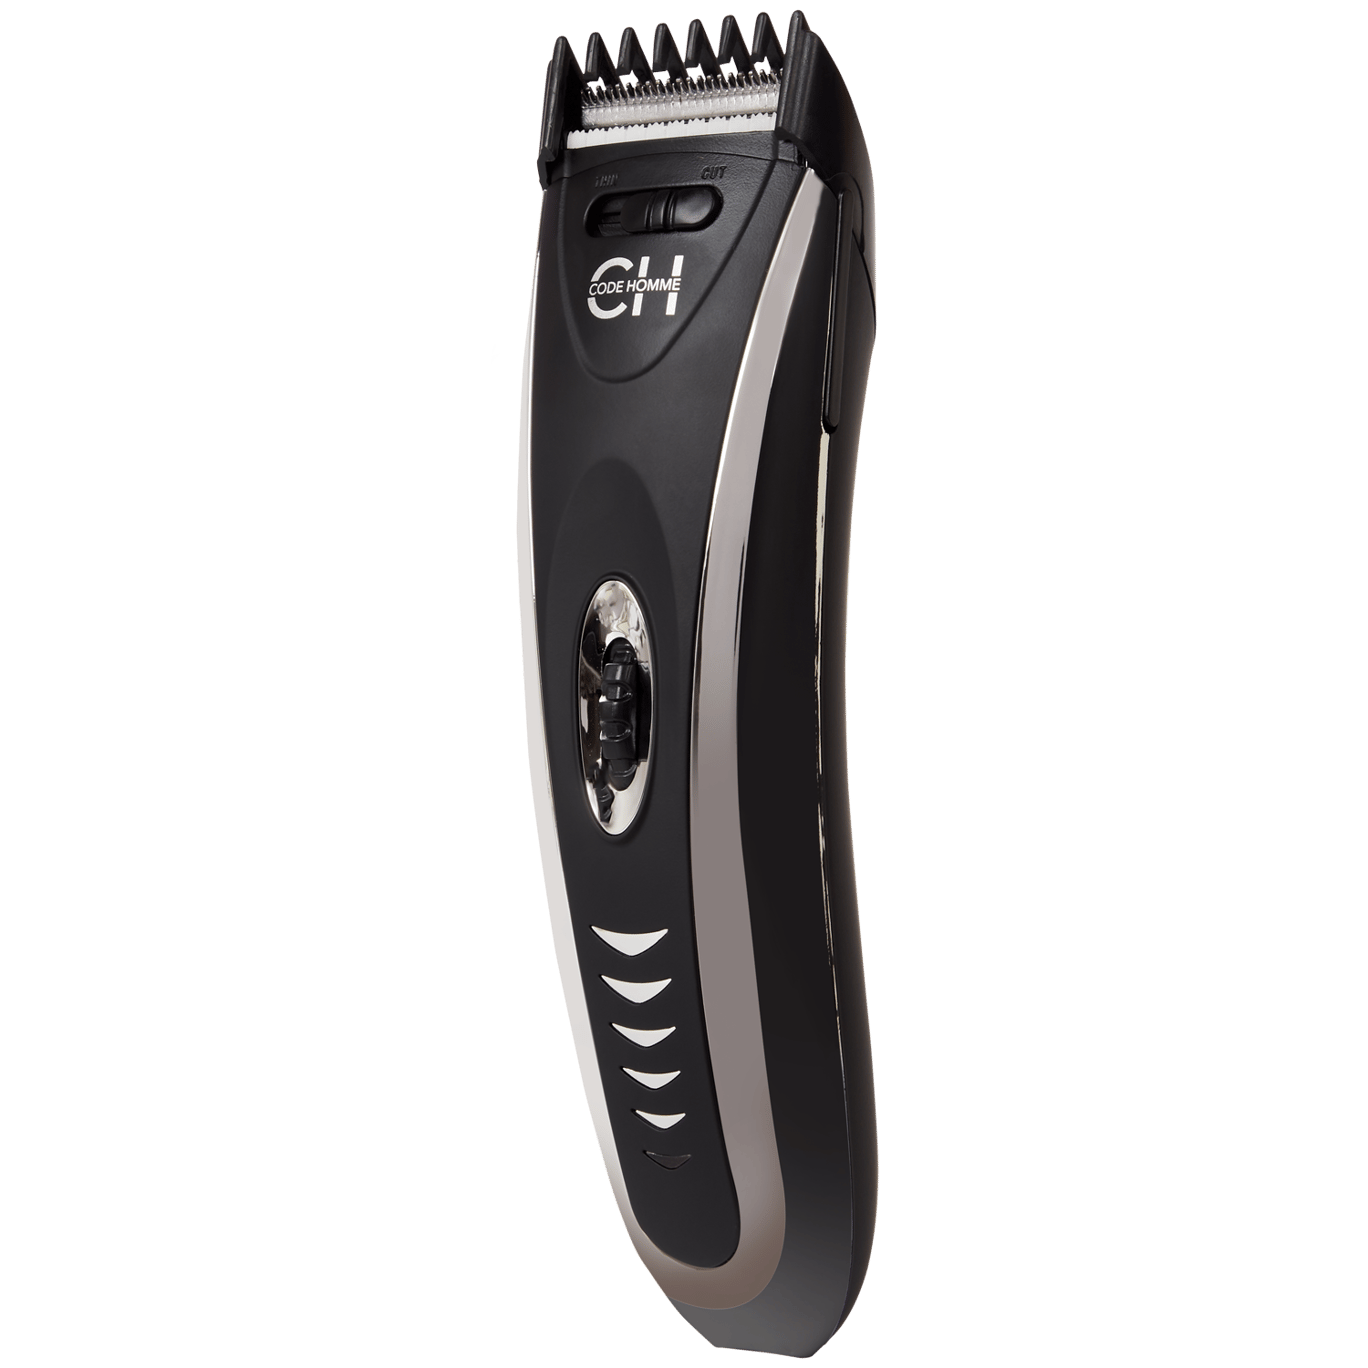 philips precision perfect trimmer reviews